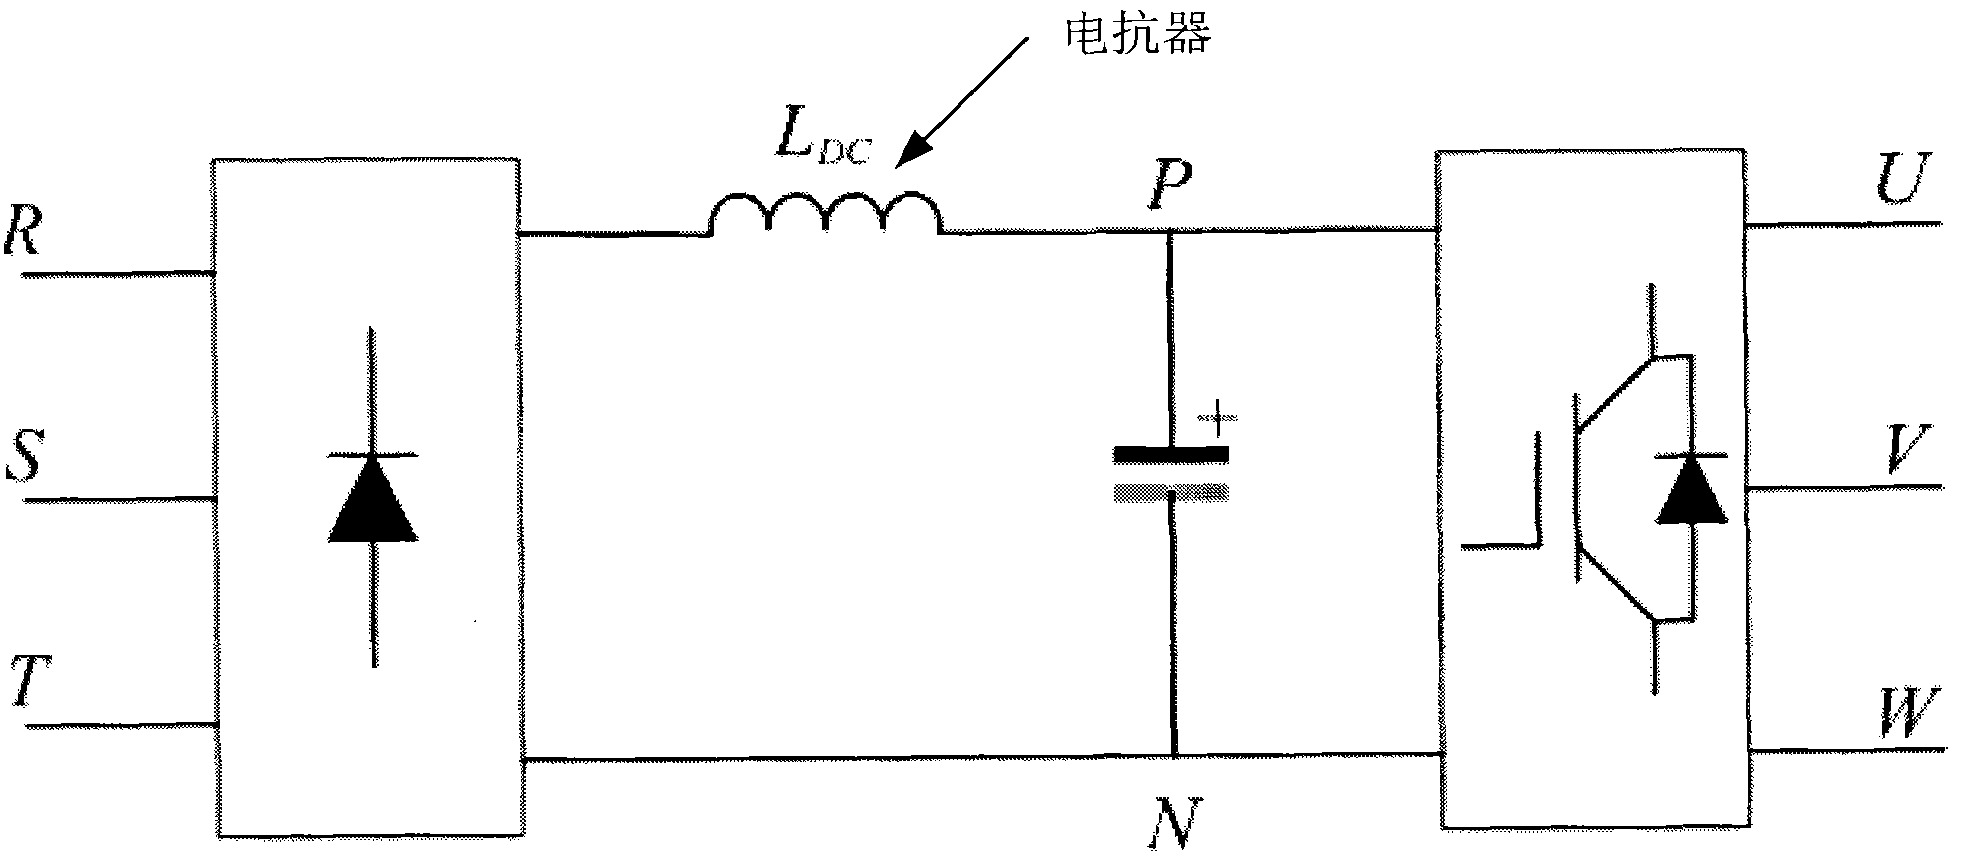 Alternating current-direct current (AC-DC) converter and frequency converter